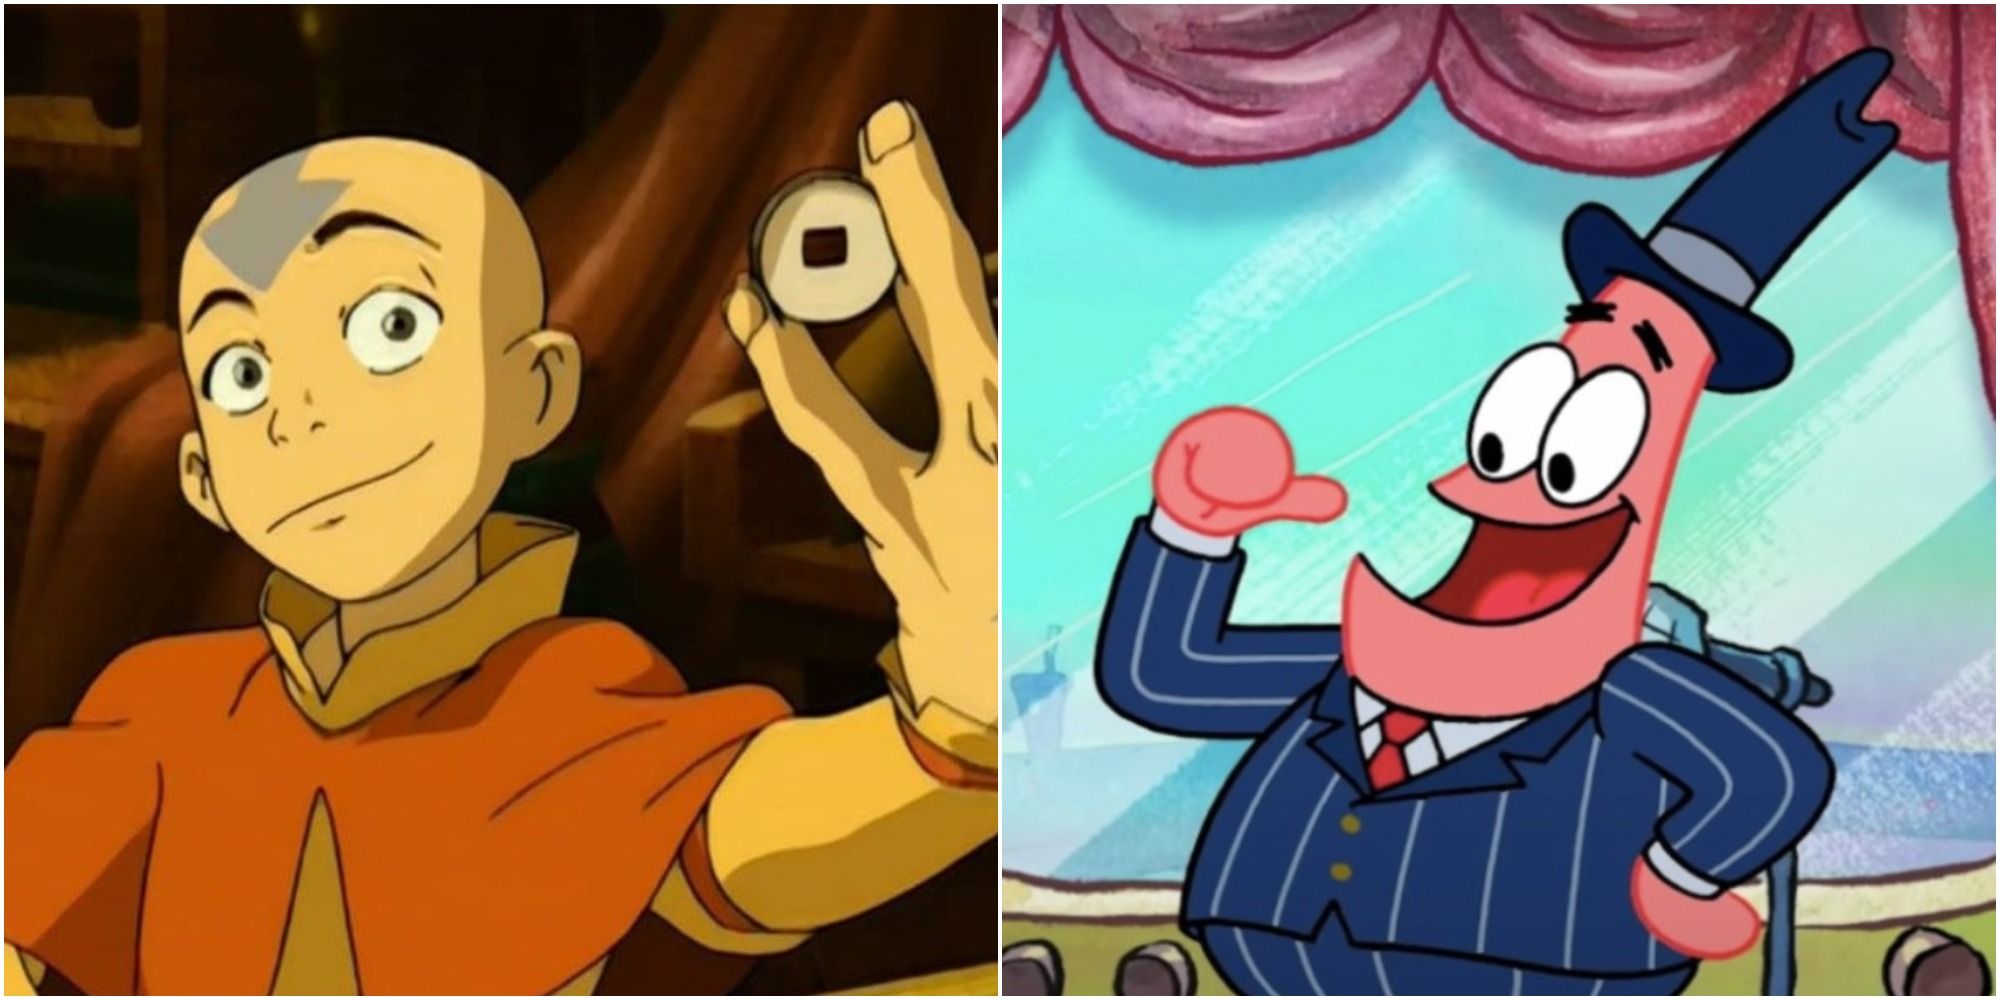 Split image showing Aang and Patrick Star